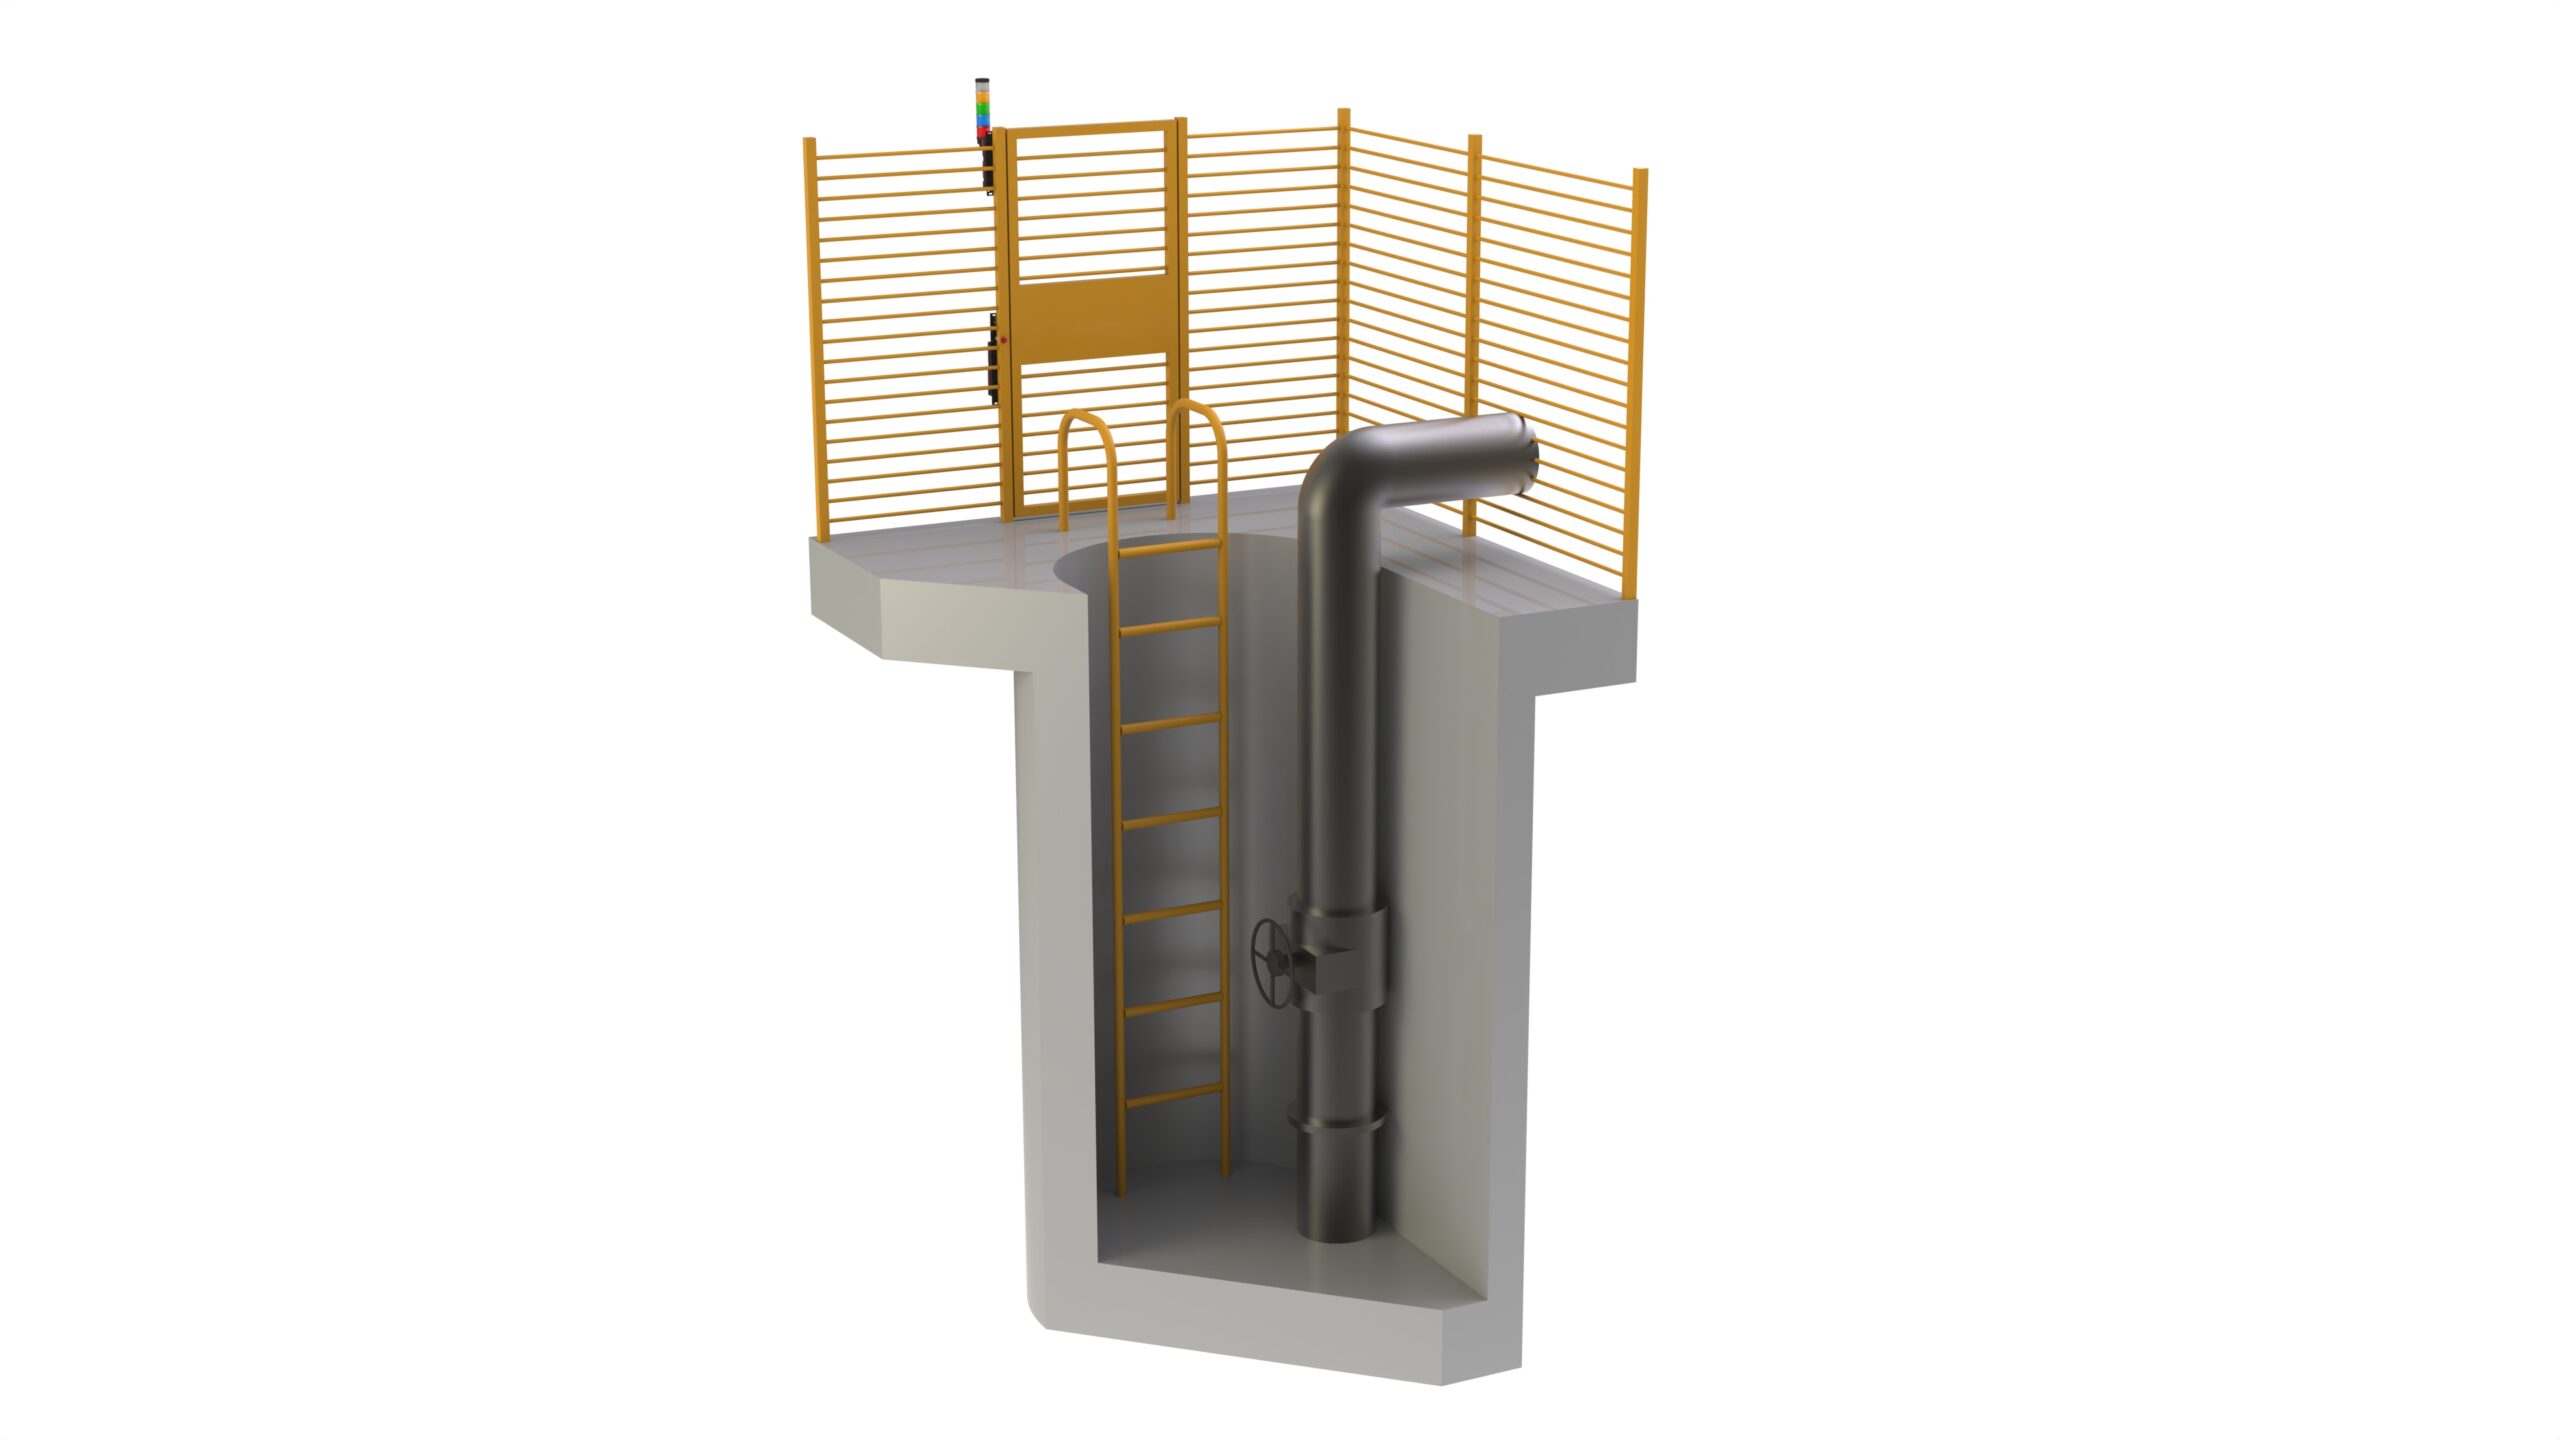 Enclosed Spaces & Restricted Access In Steel Production